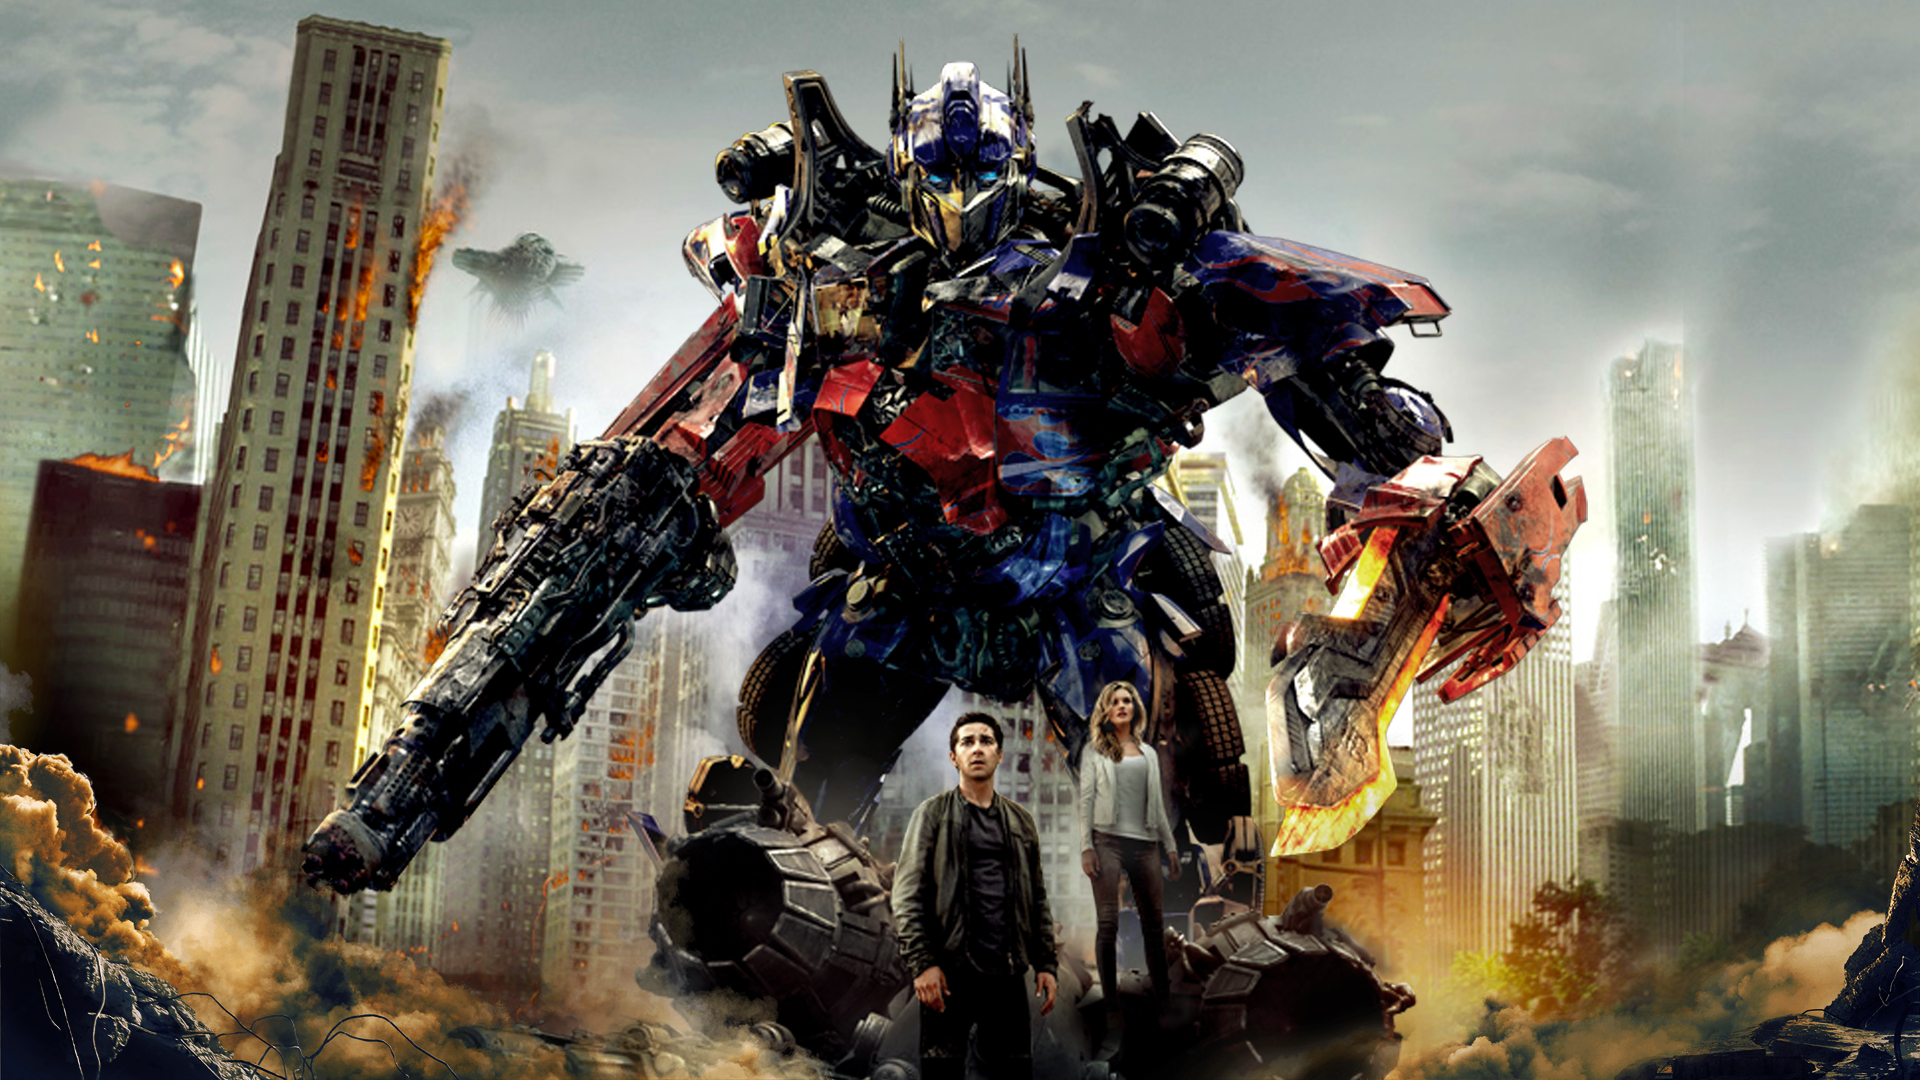 Download Optimus Prime Dark Of The Moon Wallpaper Images #xgnby ...